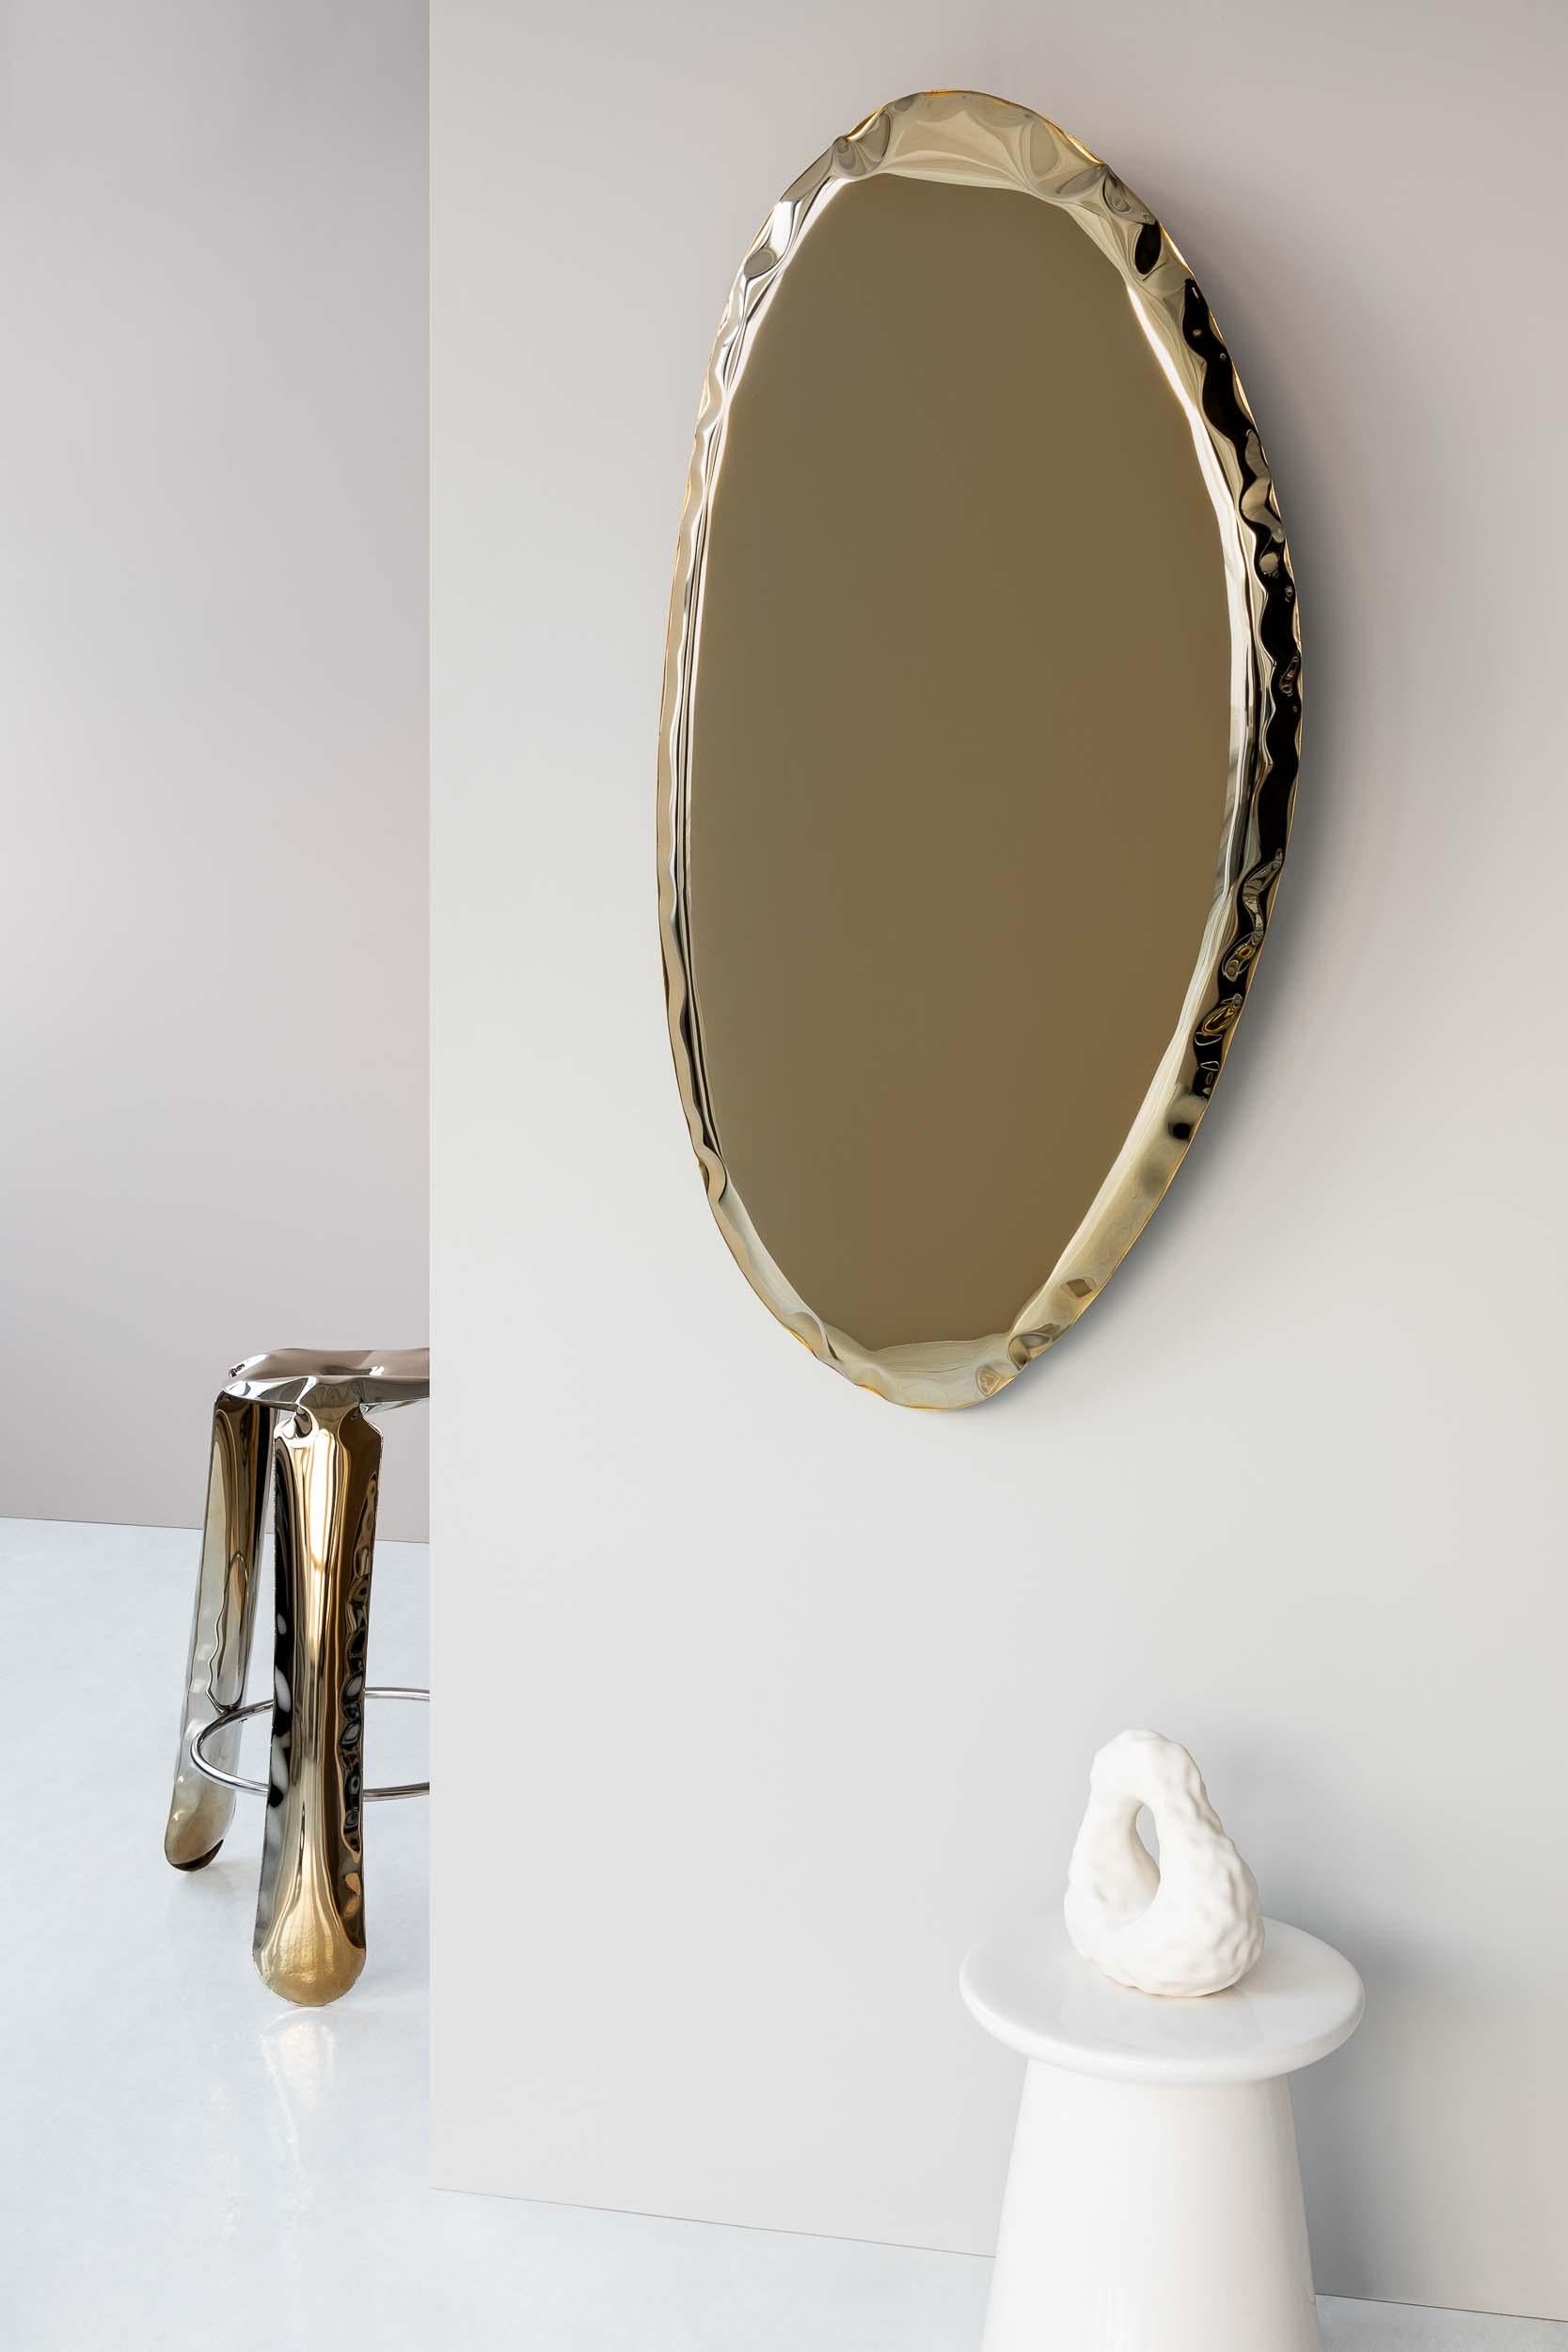 Contemporary Mirror 'Tafla O3', AURUM Collection, Light Gold, by Zieta In New Condition For Sale In Paris, FR